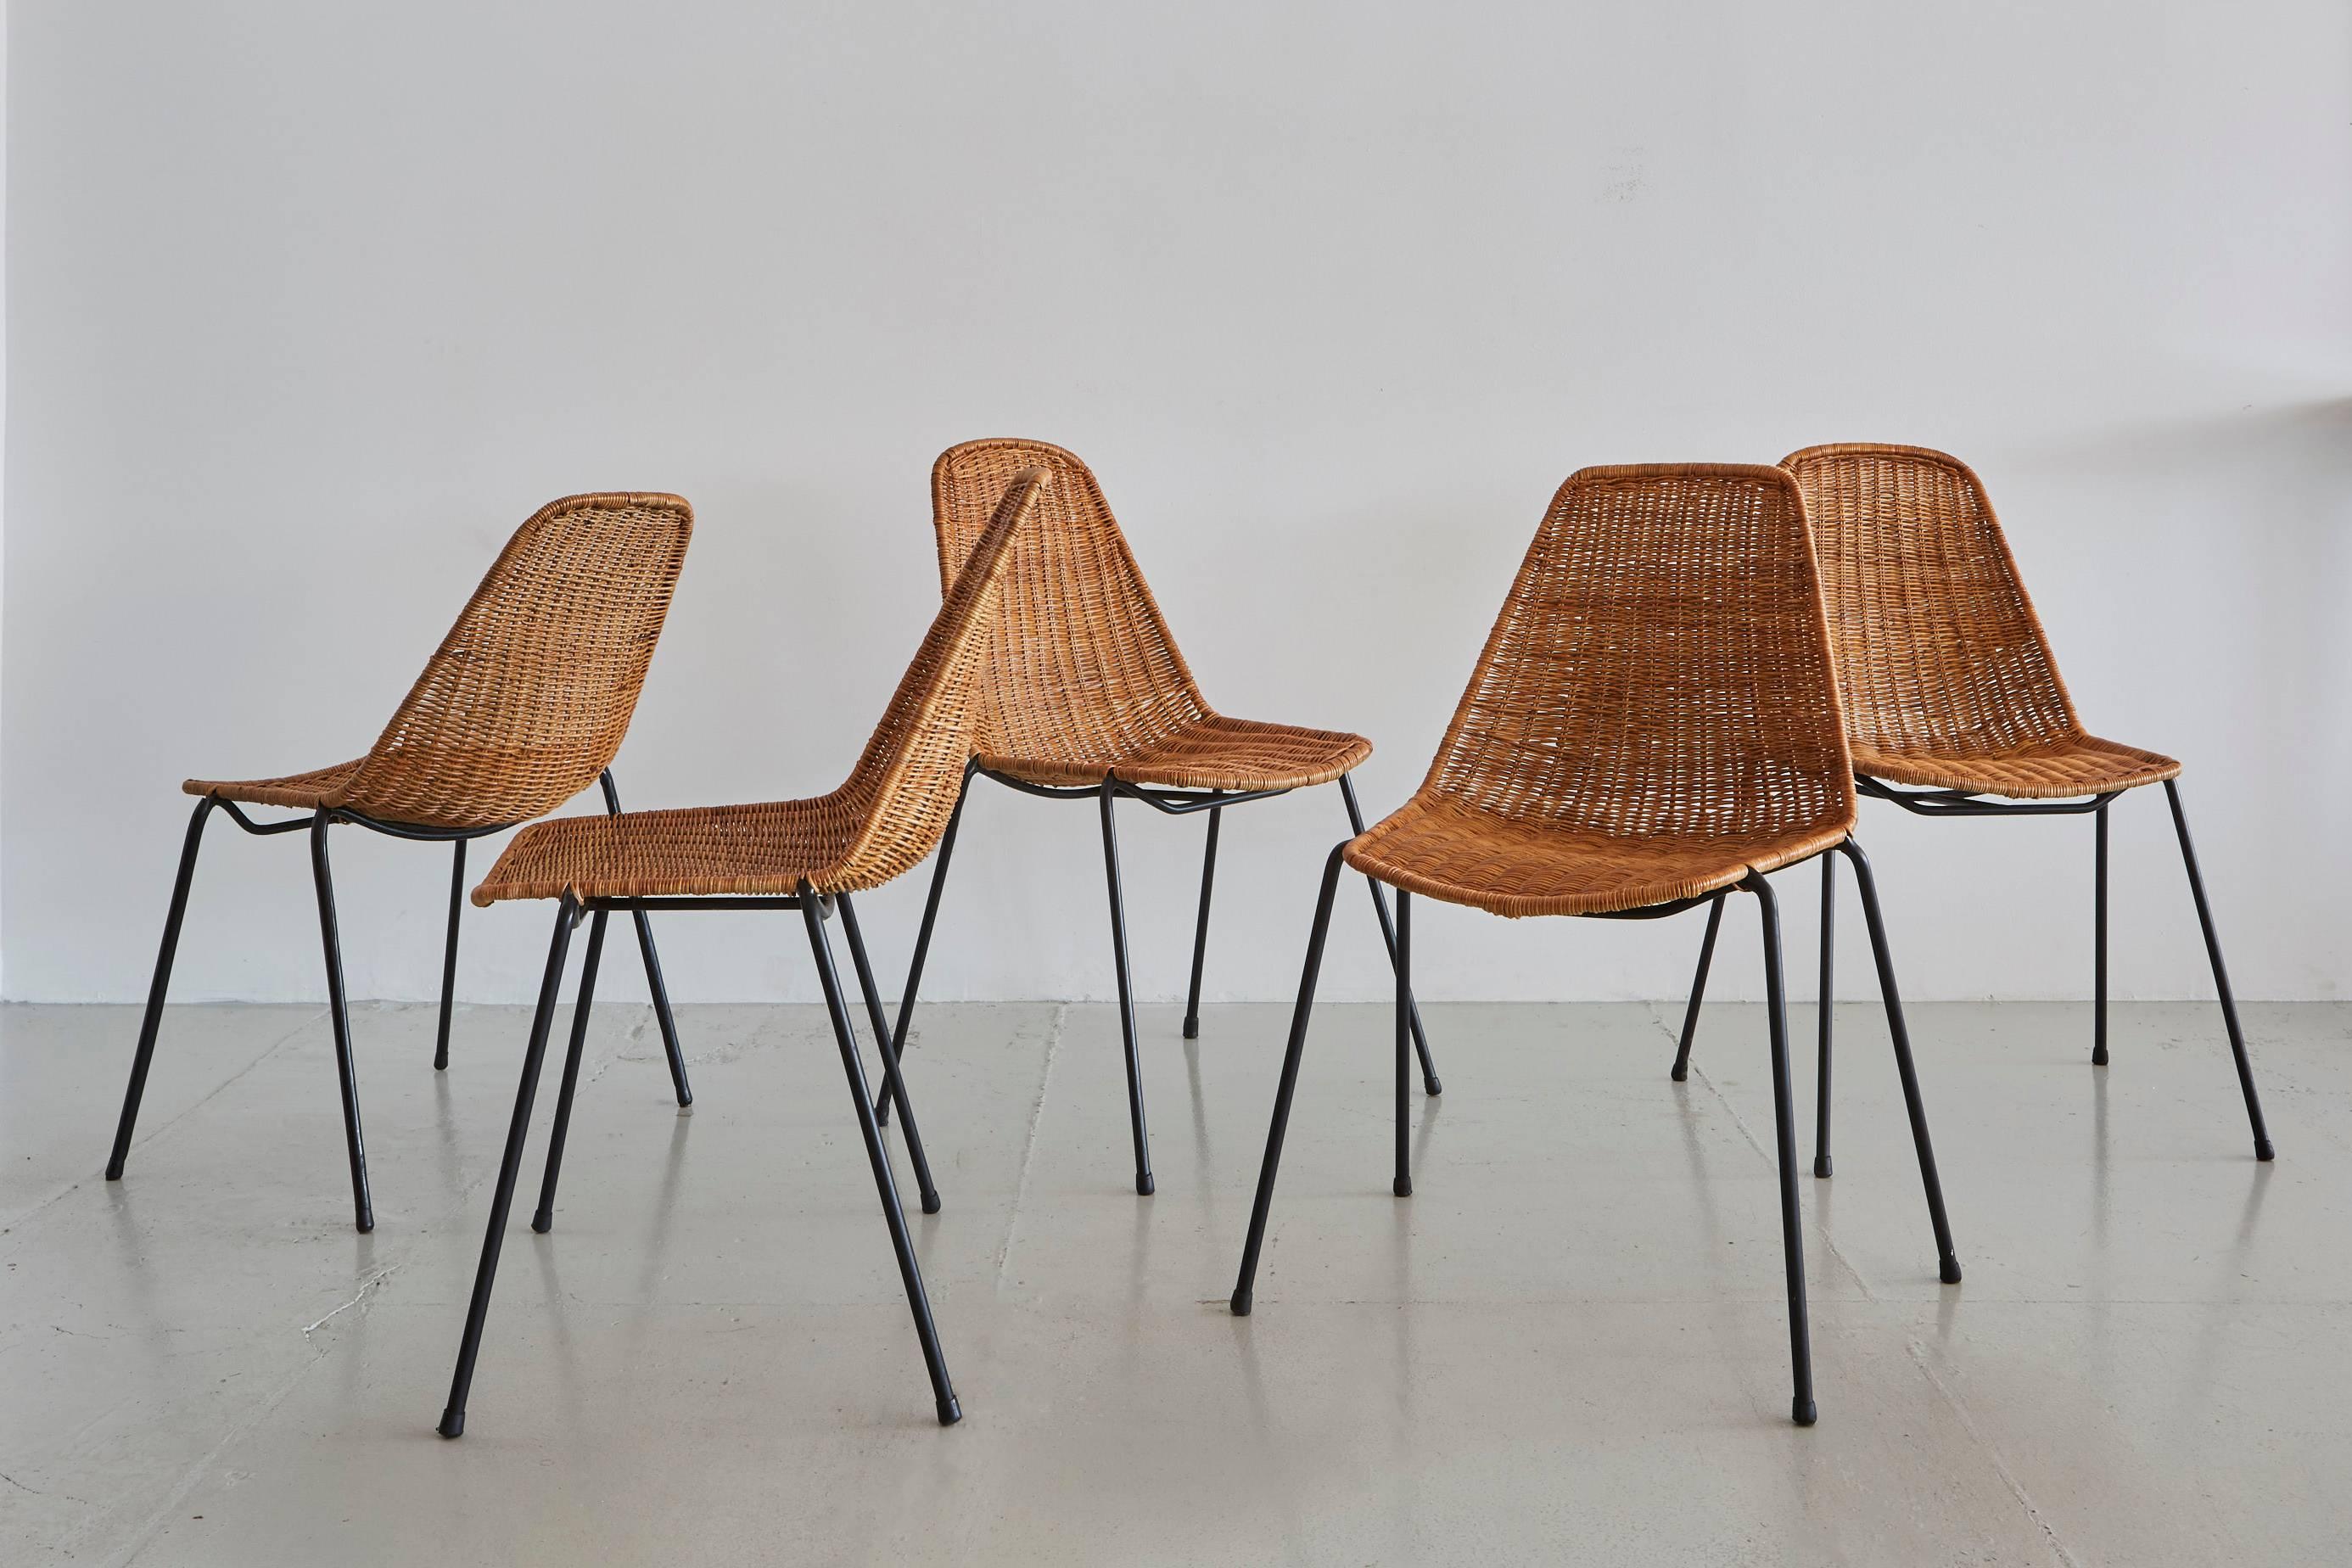 Handsome Italian wicker and iron chairs with simple bucket seat by Carlo Graffi et Franco Campo. An organic alternative to the Eames fiberglass chair!
Sold individually ten available.